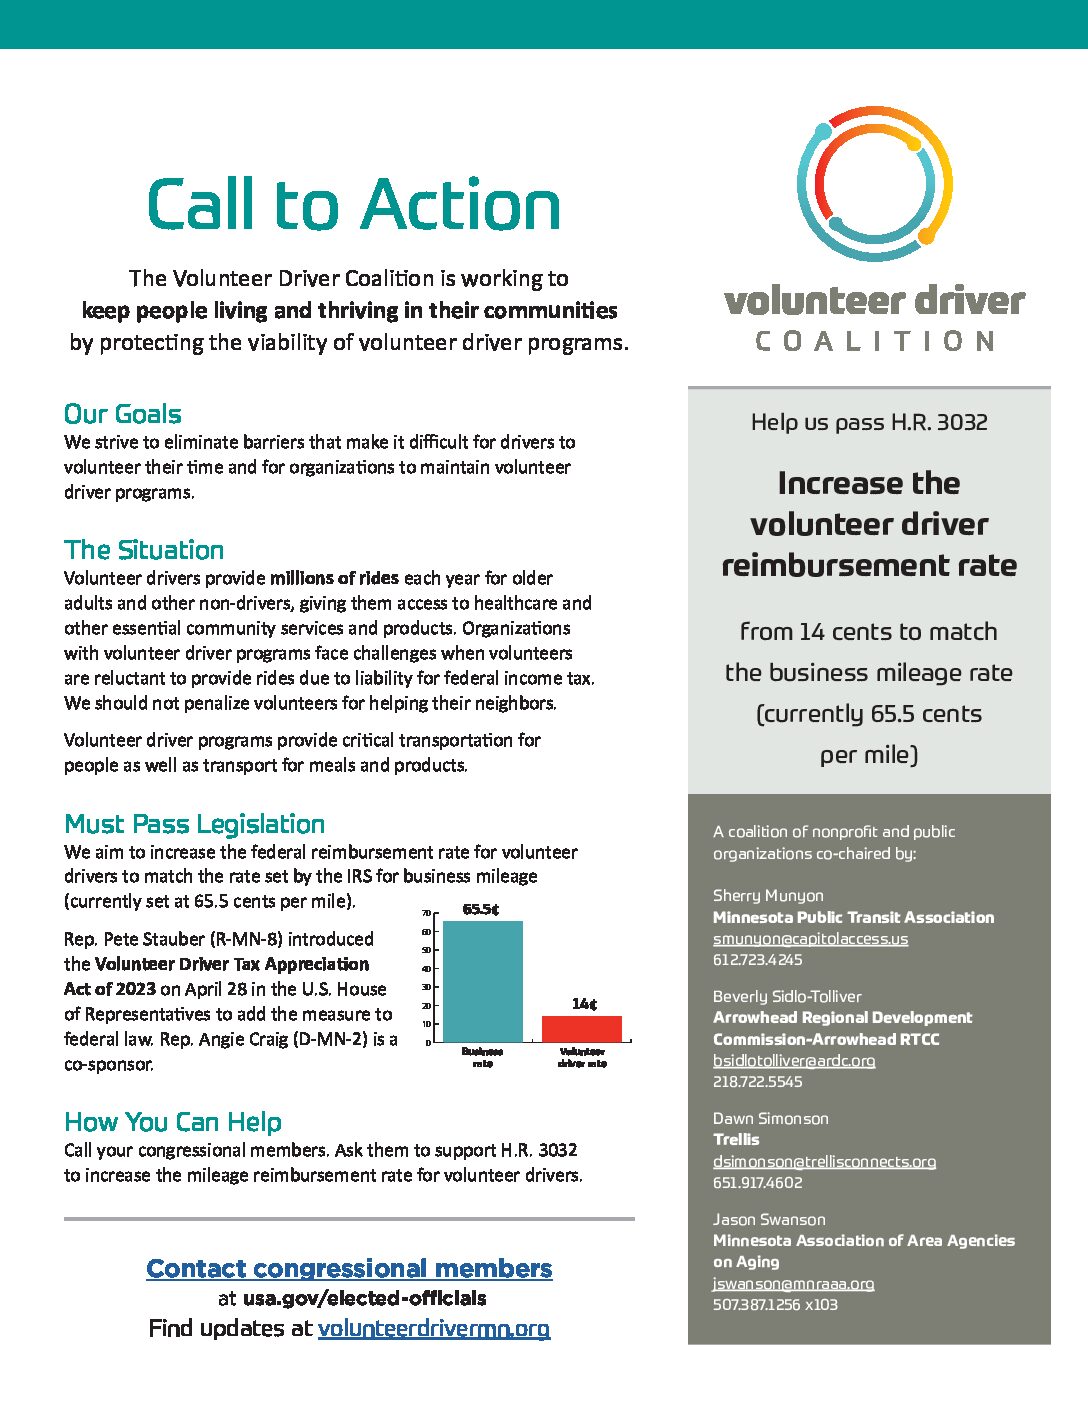 Call to Action flyer